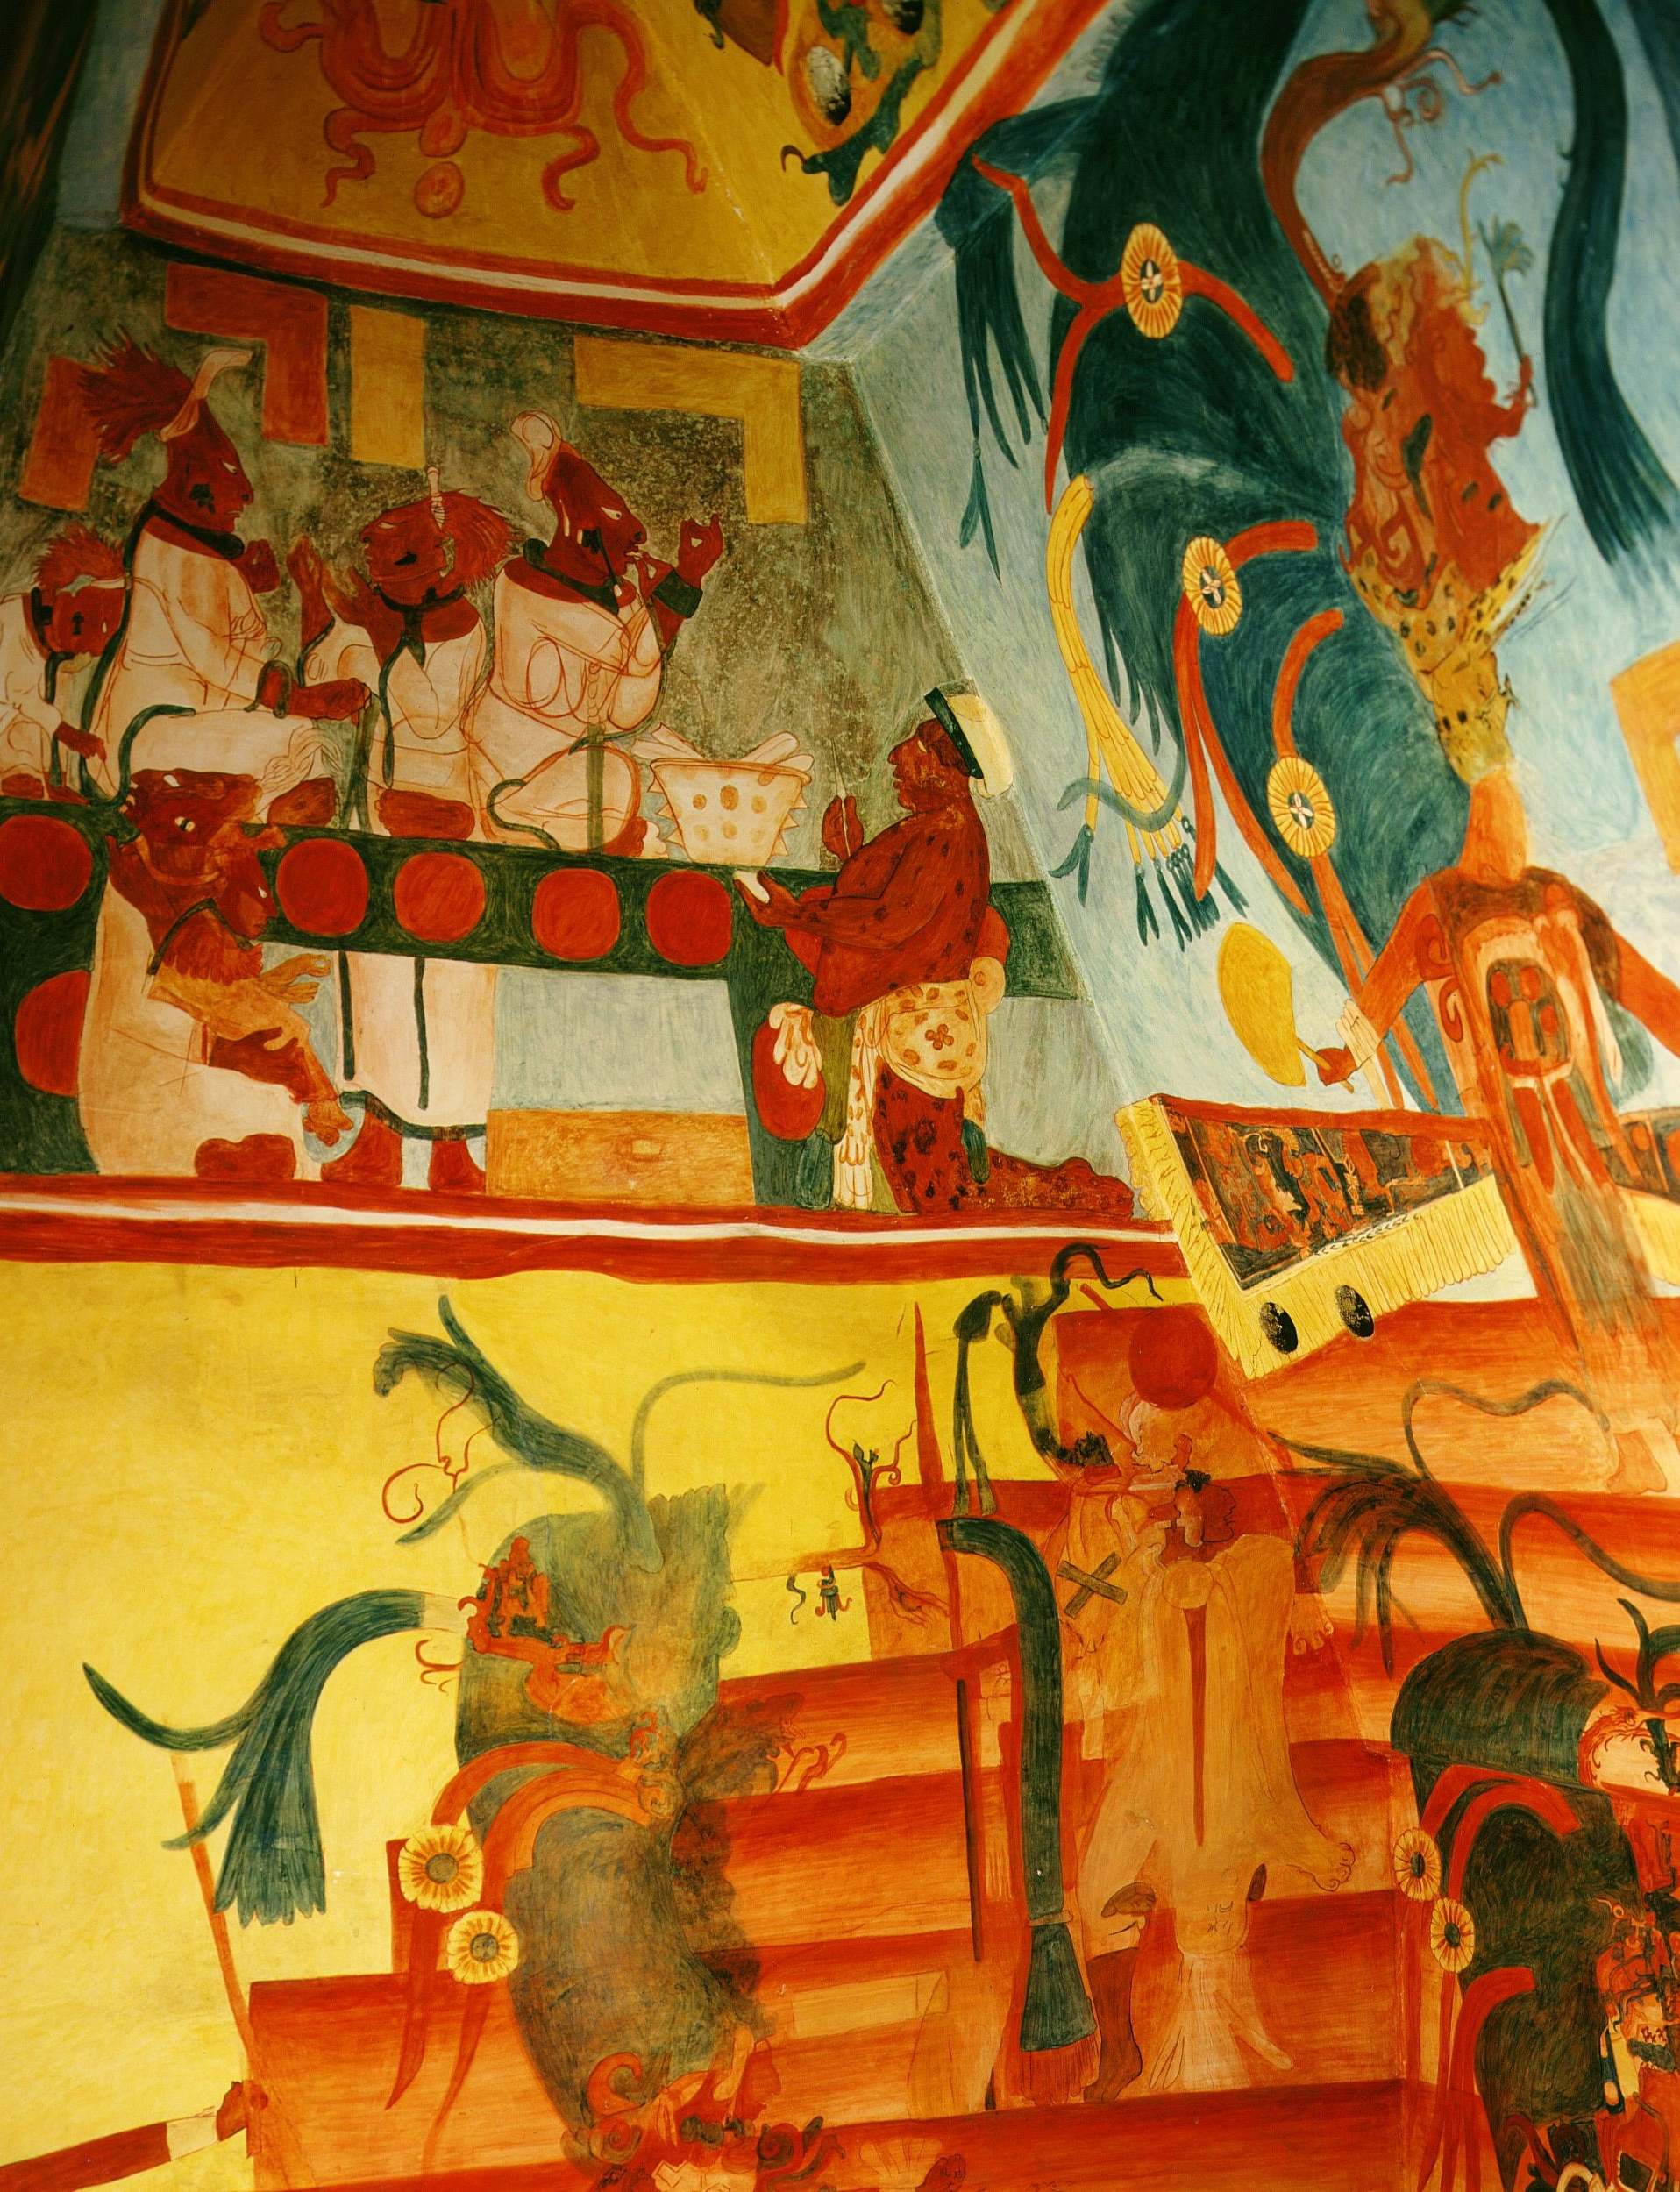 Part of the reproduction of the murals at Bonampak, an ancient Mayan archaeological site